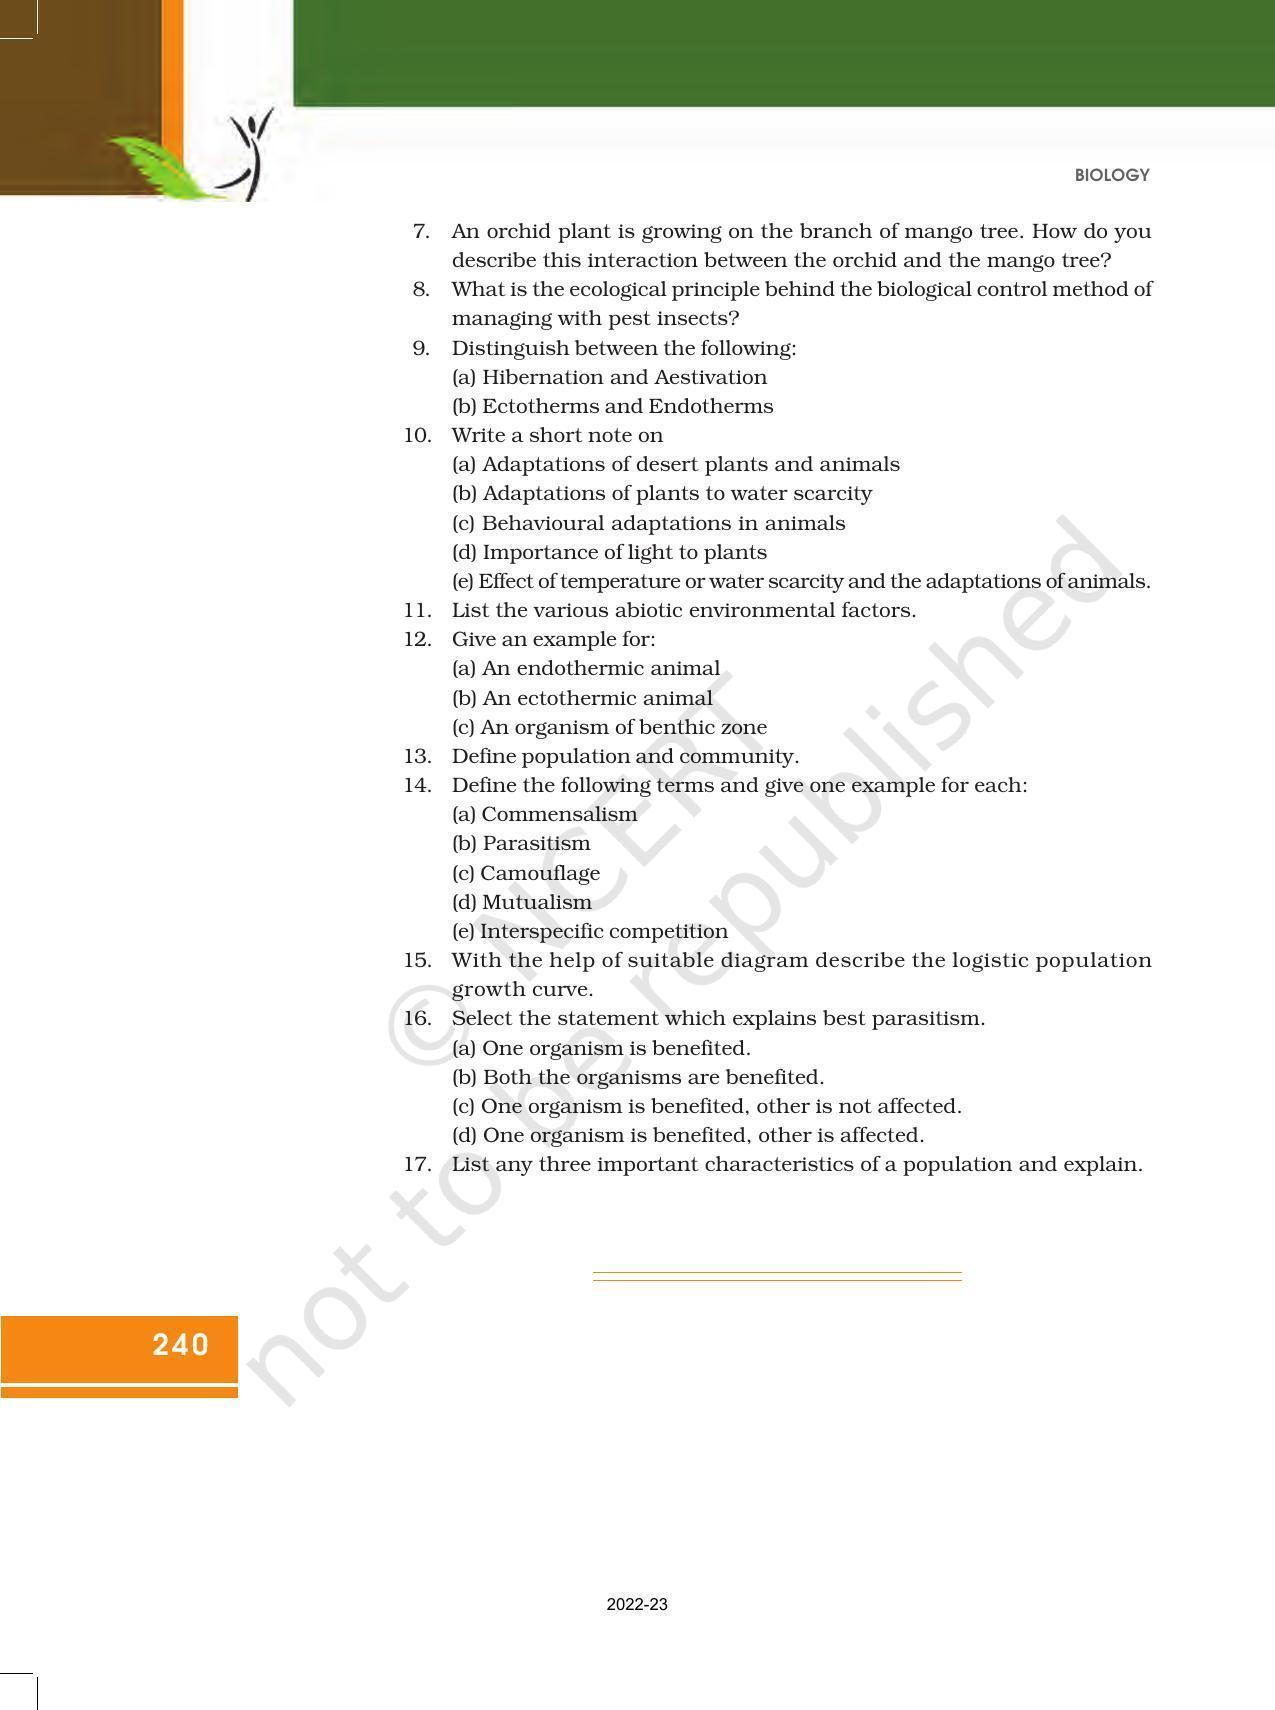 NCERT Book for Class 12 Biology Chapter 13 Organisms and Populations - Page 24